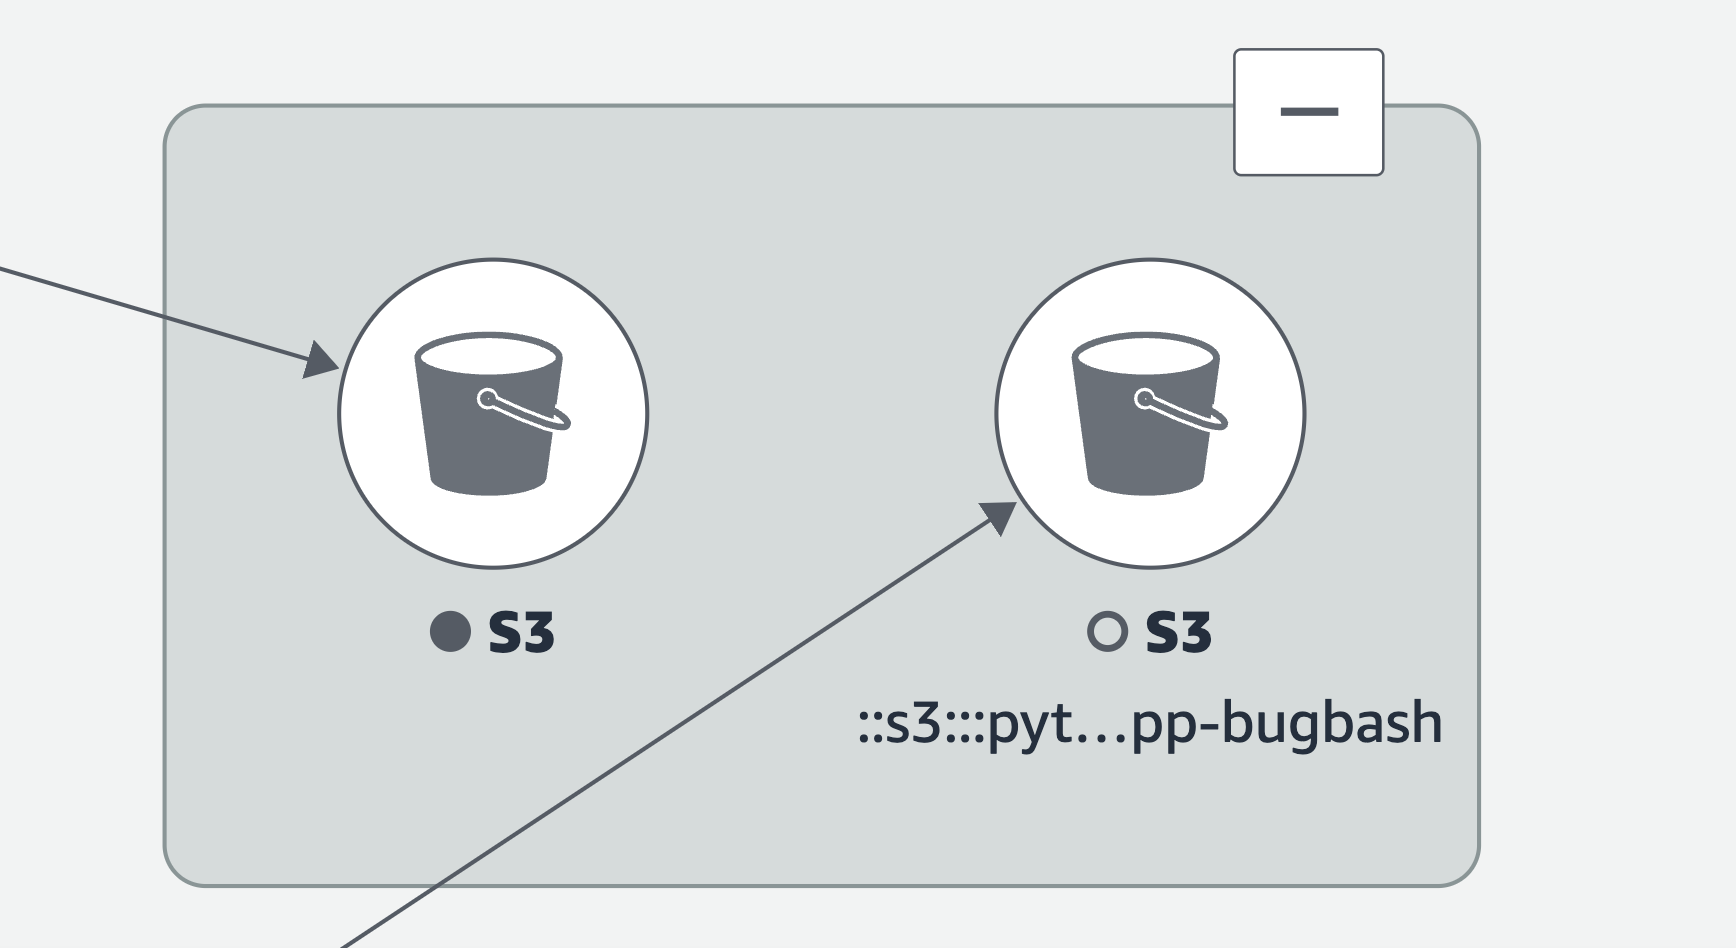 CloudWatch expanded group inside a service map grouping two Amazon S3 buckets.